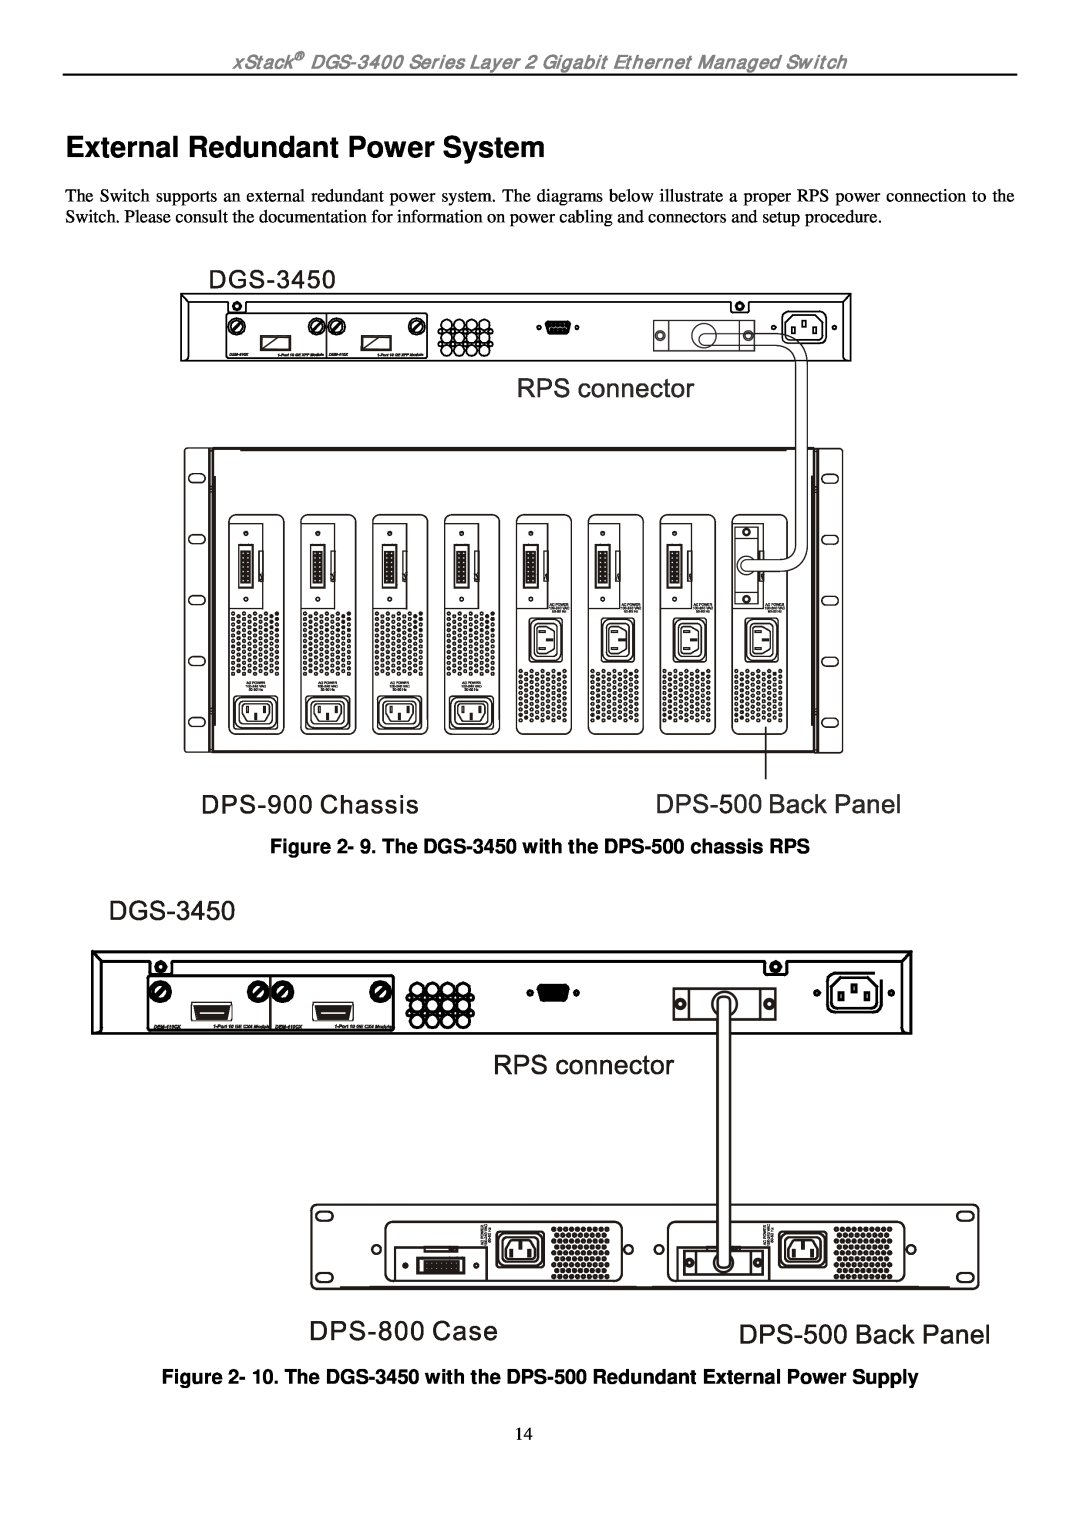 D-Link ethernet managed switch manual External Redundant Power System, 9. The DGS-3450 with the DPS-500 chassis RPS 